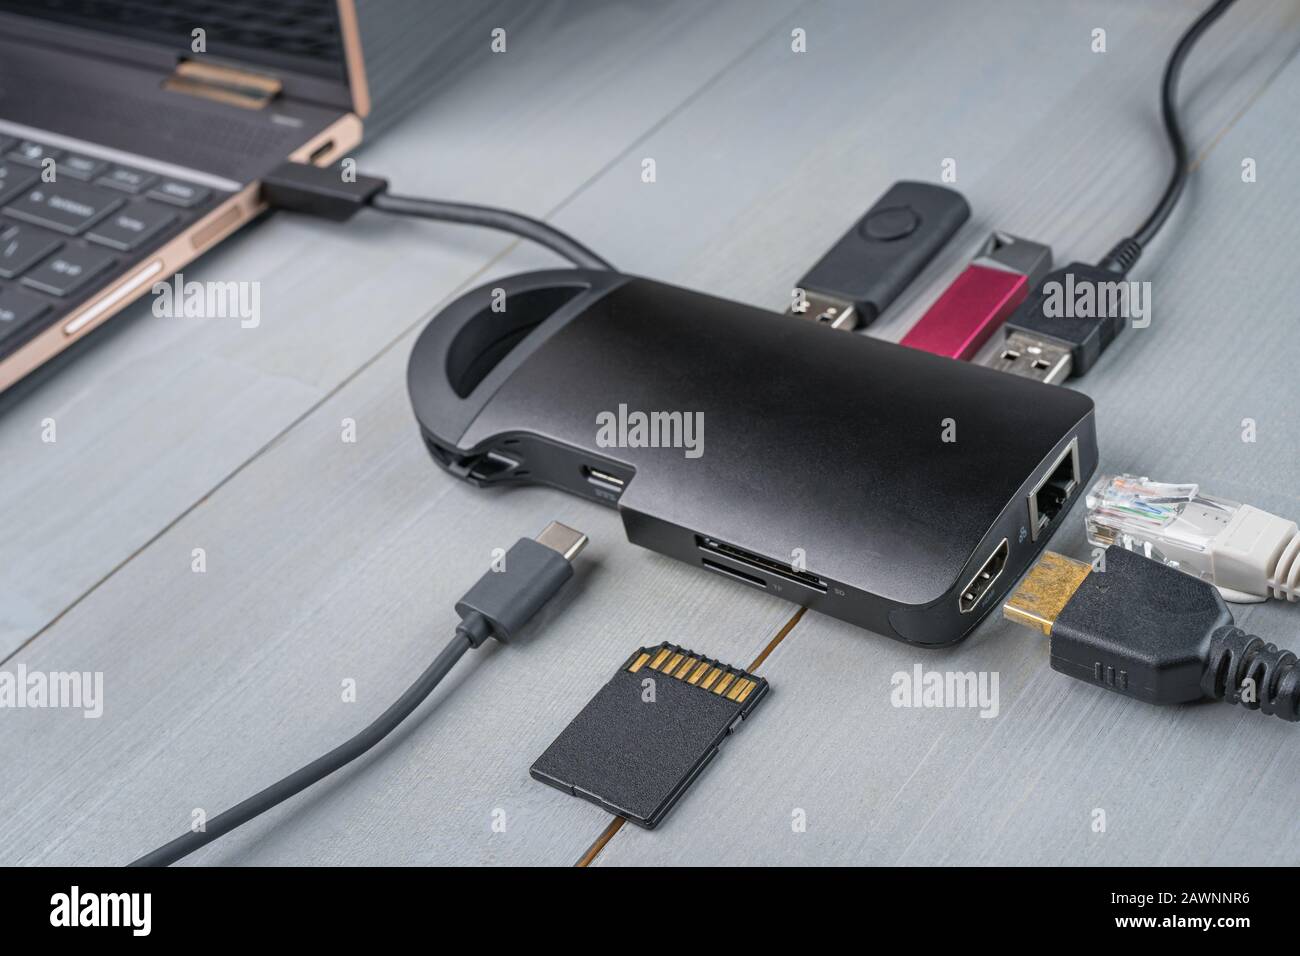 USB Type C adapter or hub connected to the laptop with various accessories - pendrives, hdmi, ethernet, memory card, cables. Stock Photo